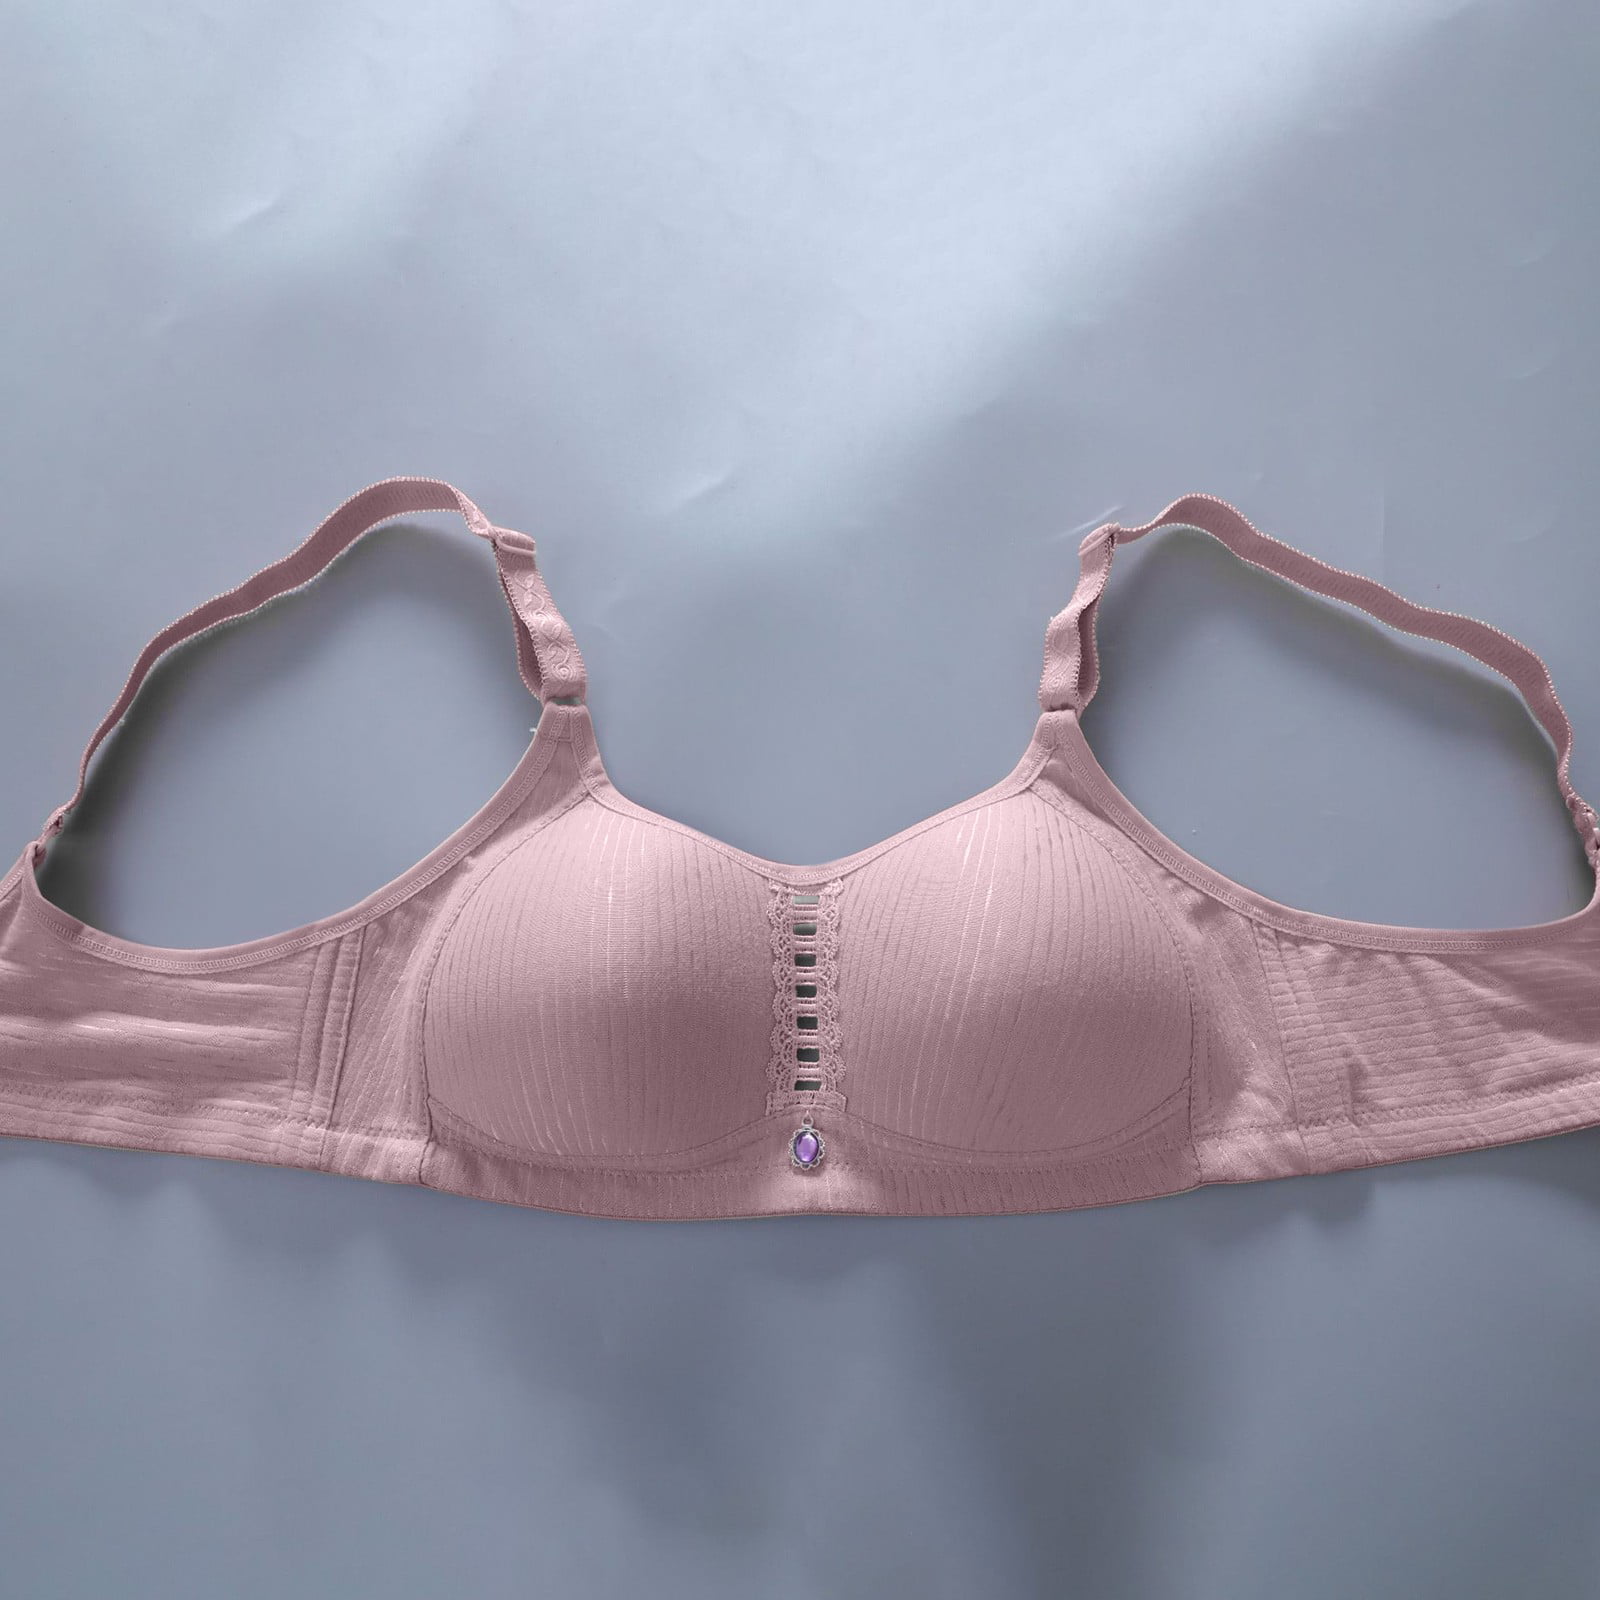 purcolt Plus Size Wire Free Bras for Women, Shockproof Breathable